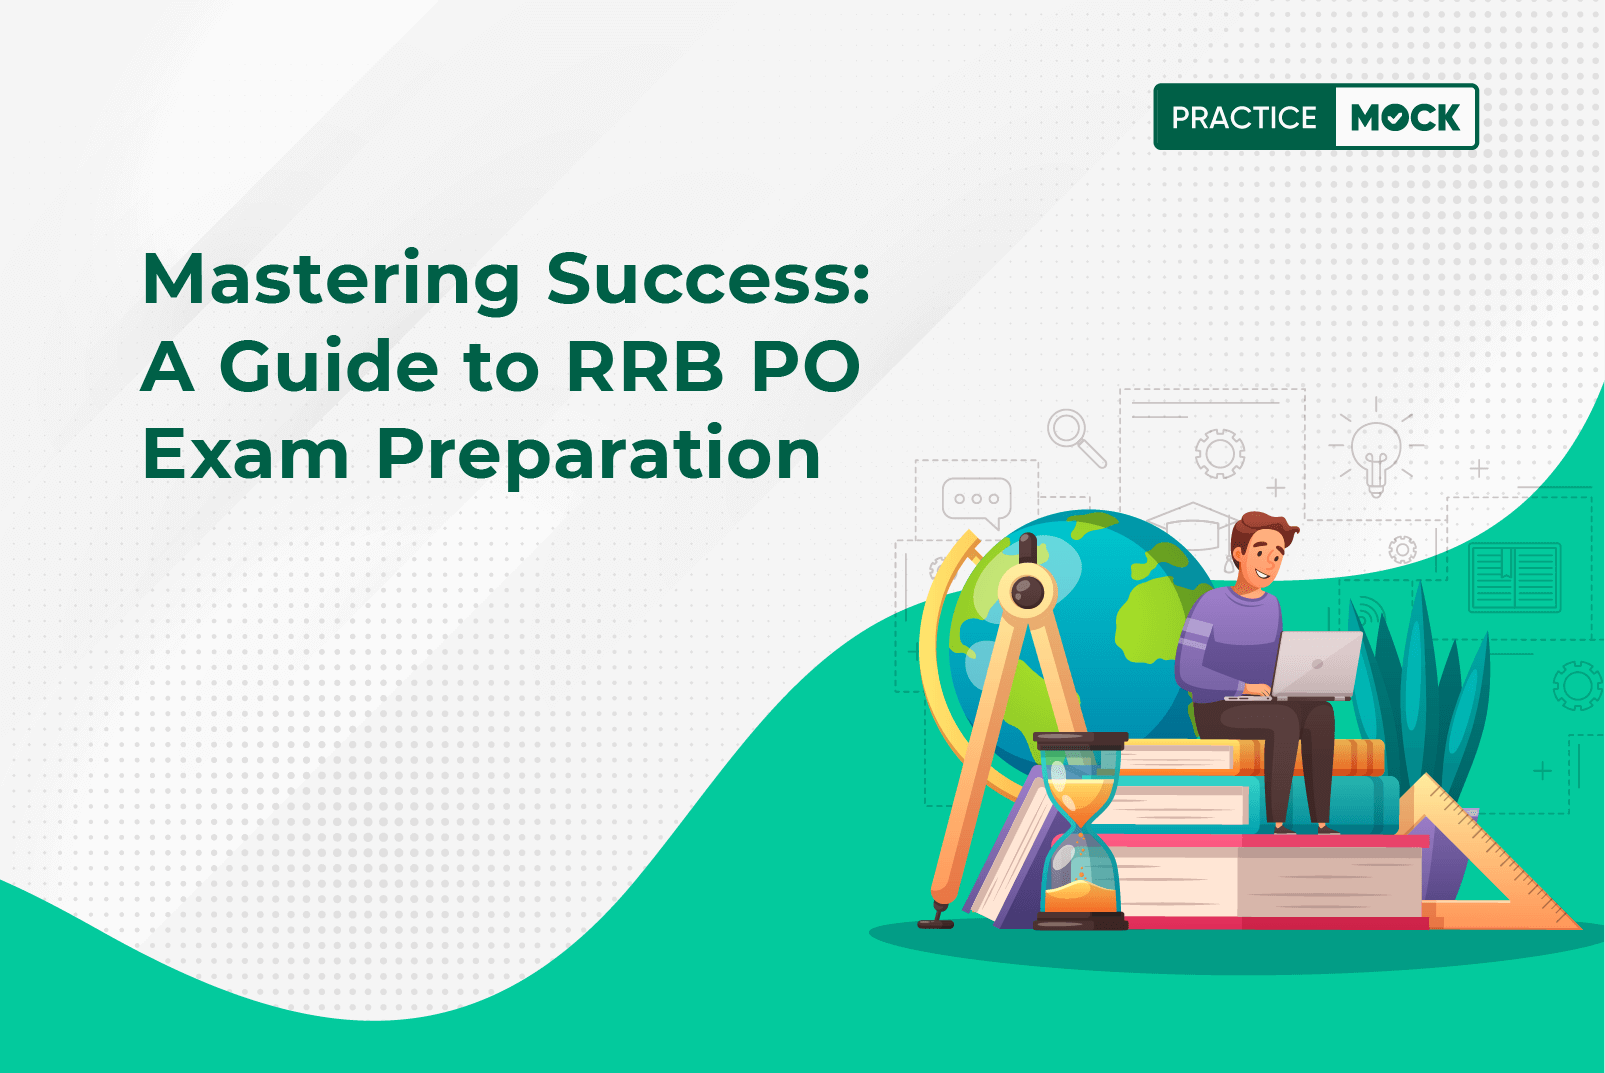 Mastering Success: A Guide to RRB PO Exam Preparation